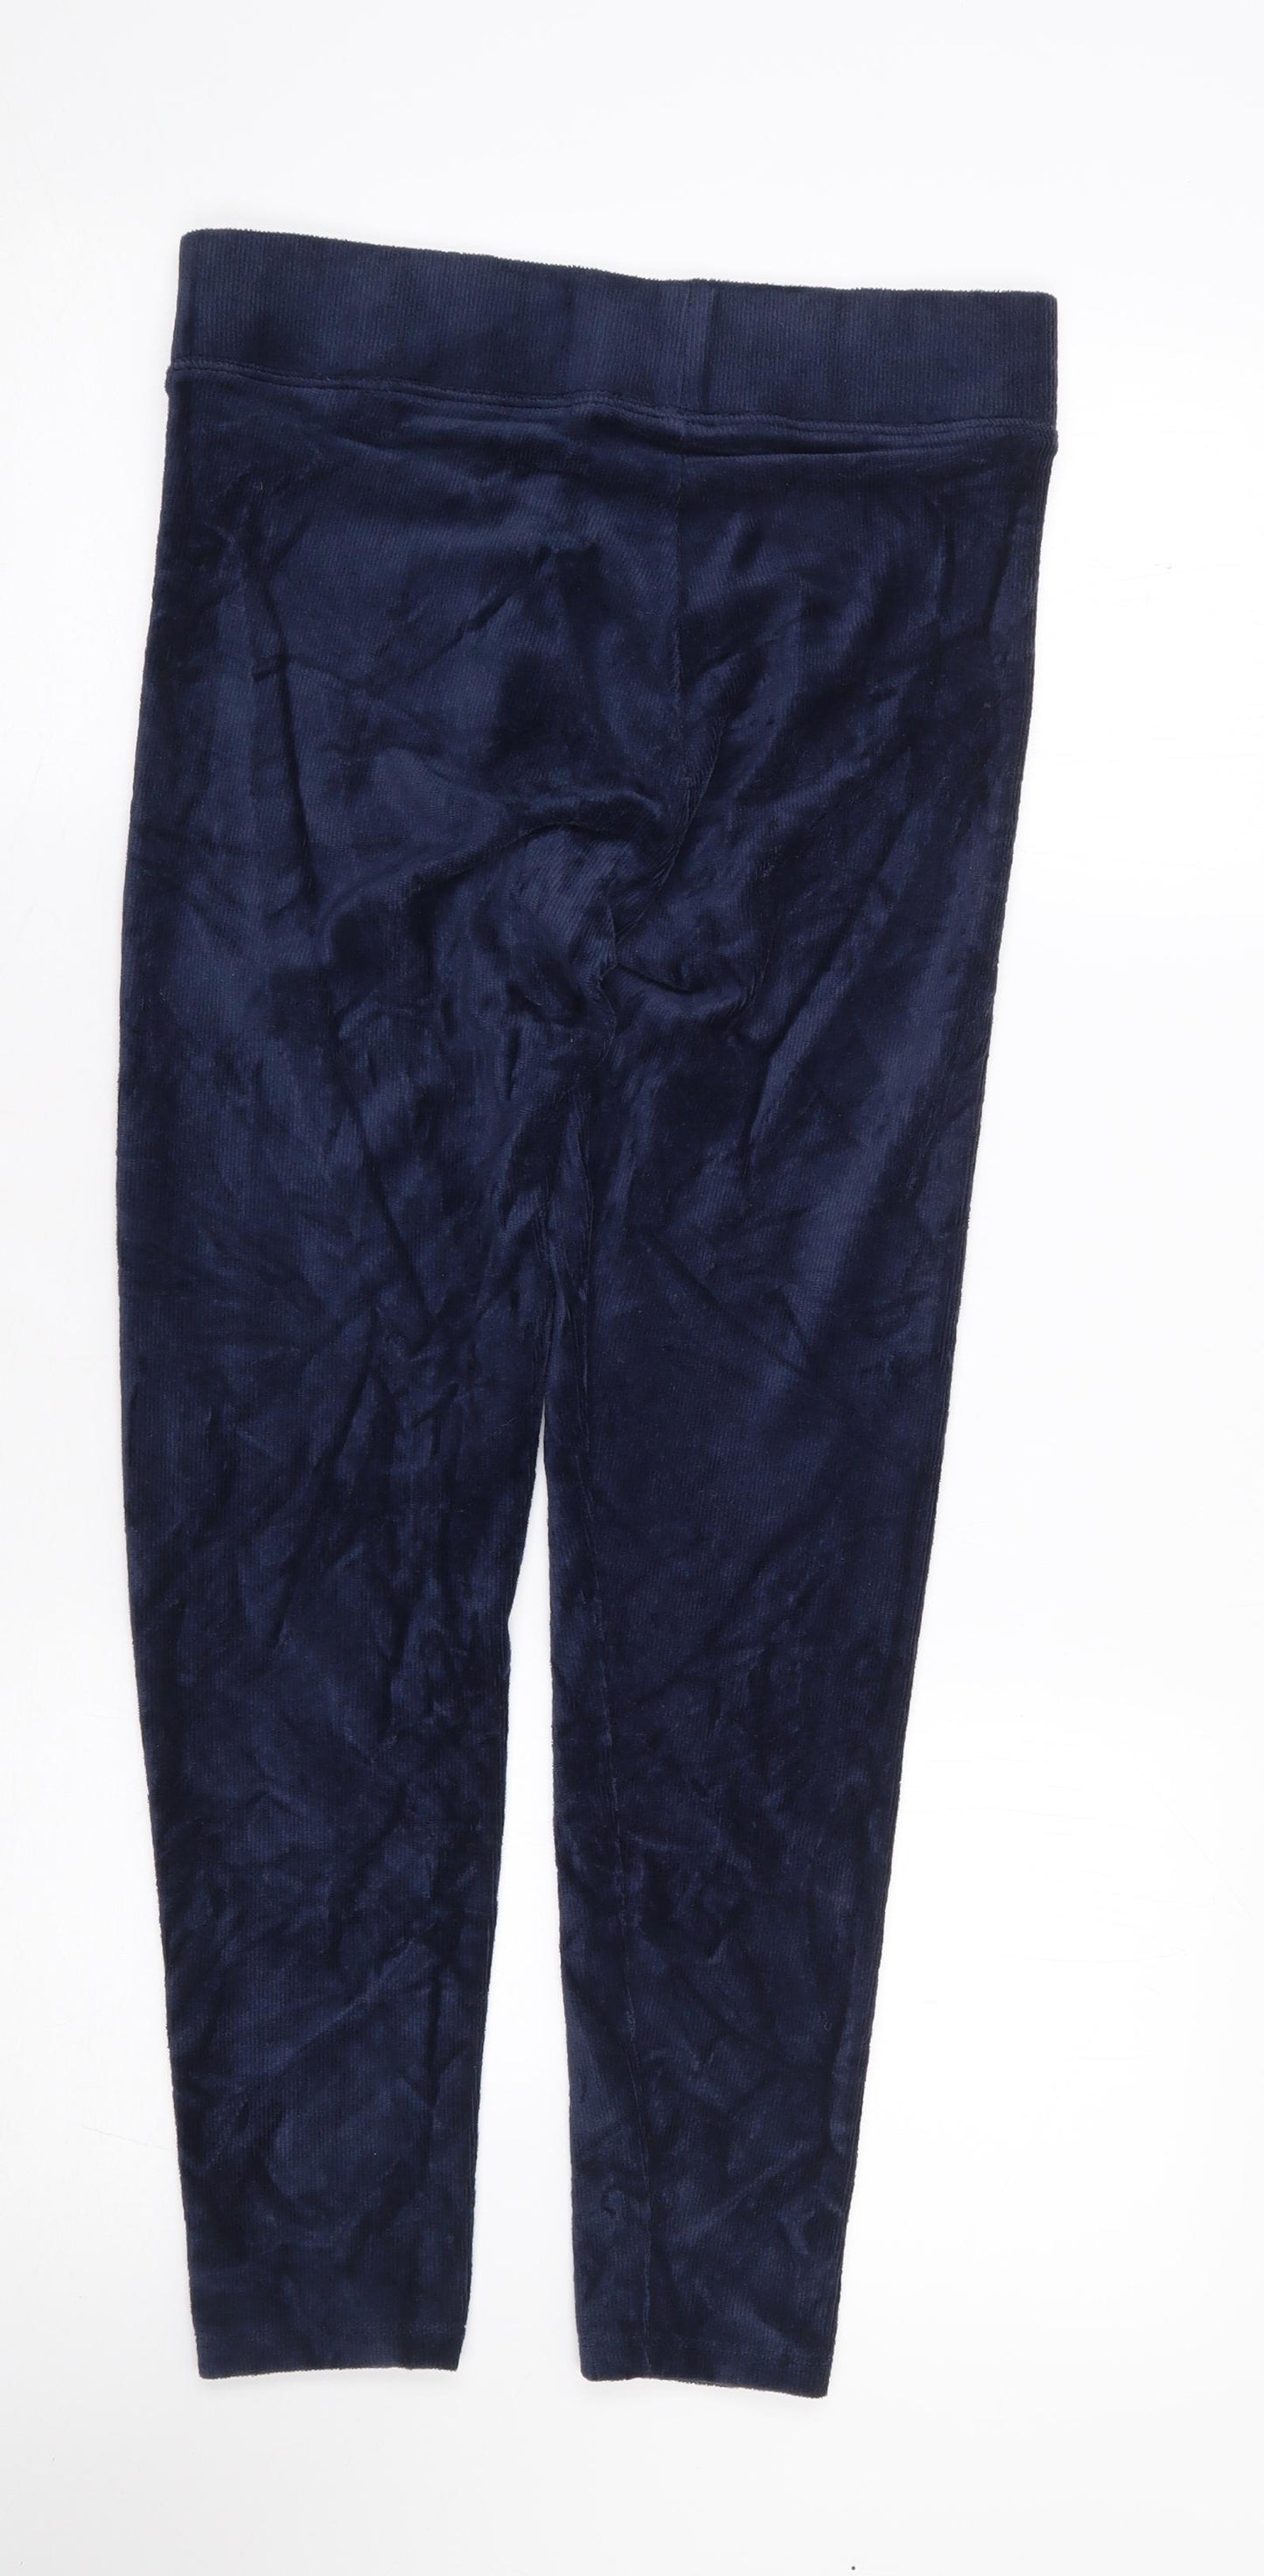 Marks an dspencer Womens Blue Cotton Carrot Leggings Size 10 L26 in